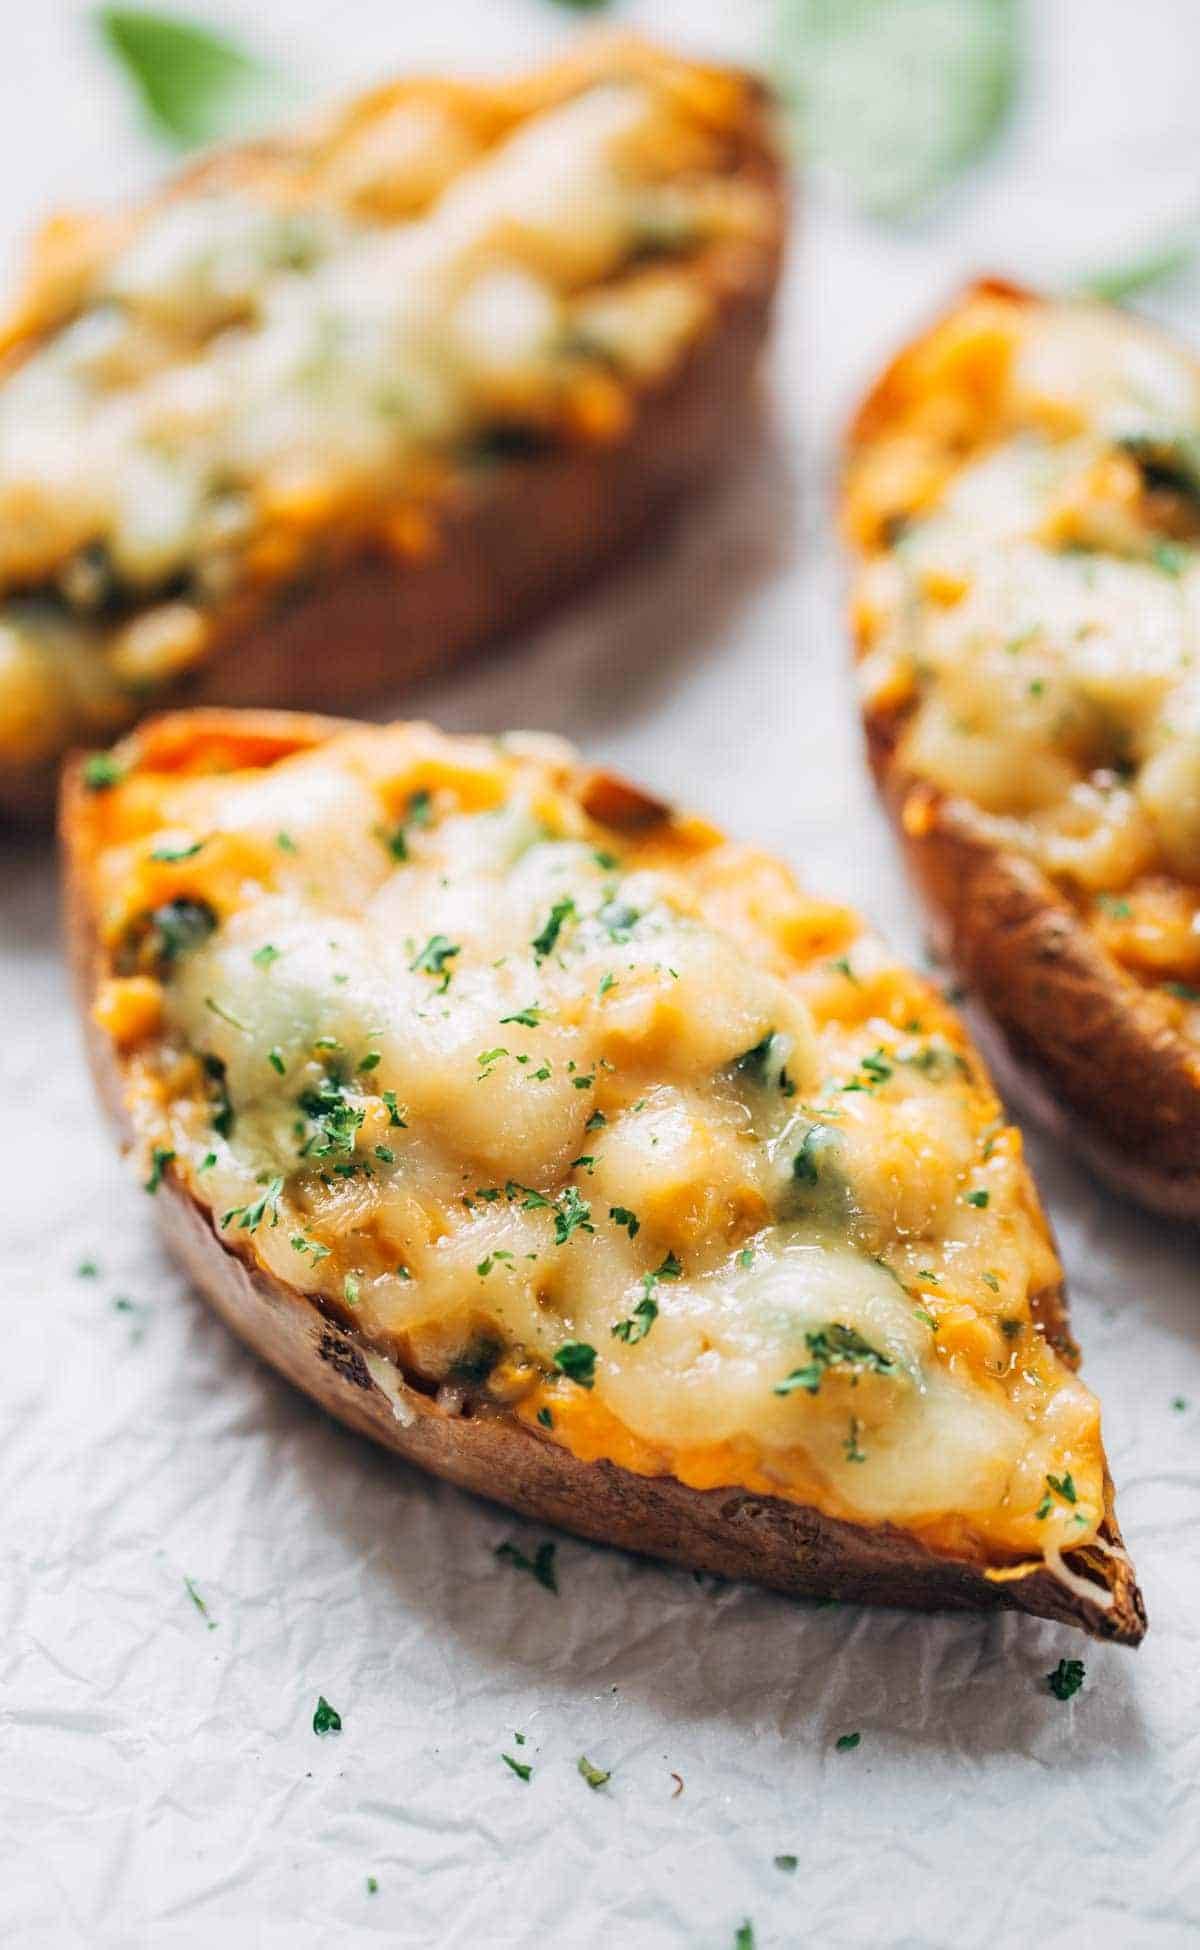 Sweet potato skins with mashed sweet potato, chickpeas, spinach, and Mozzarella cheese. 